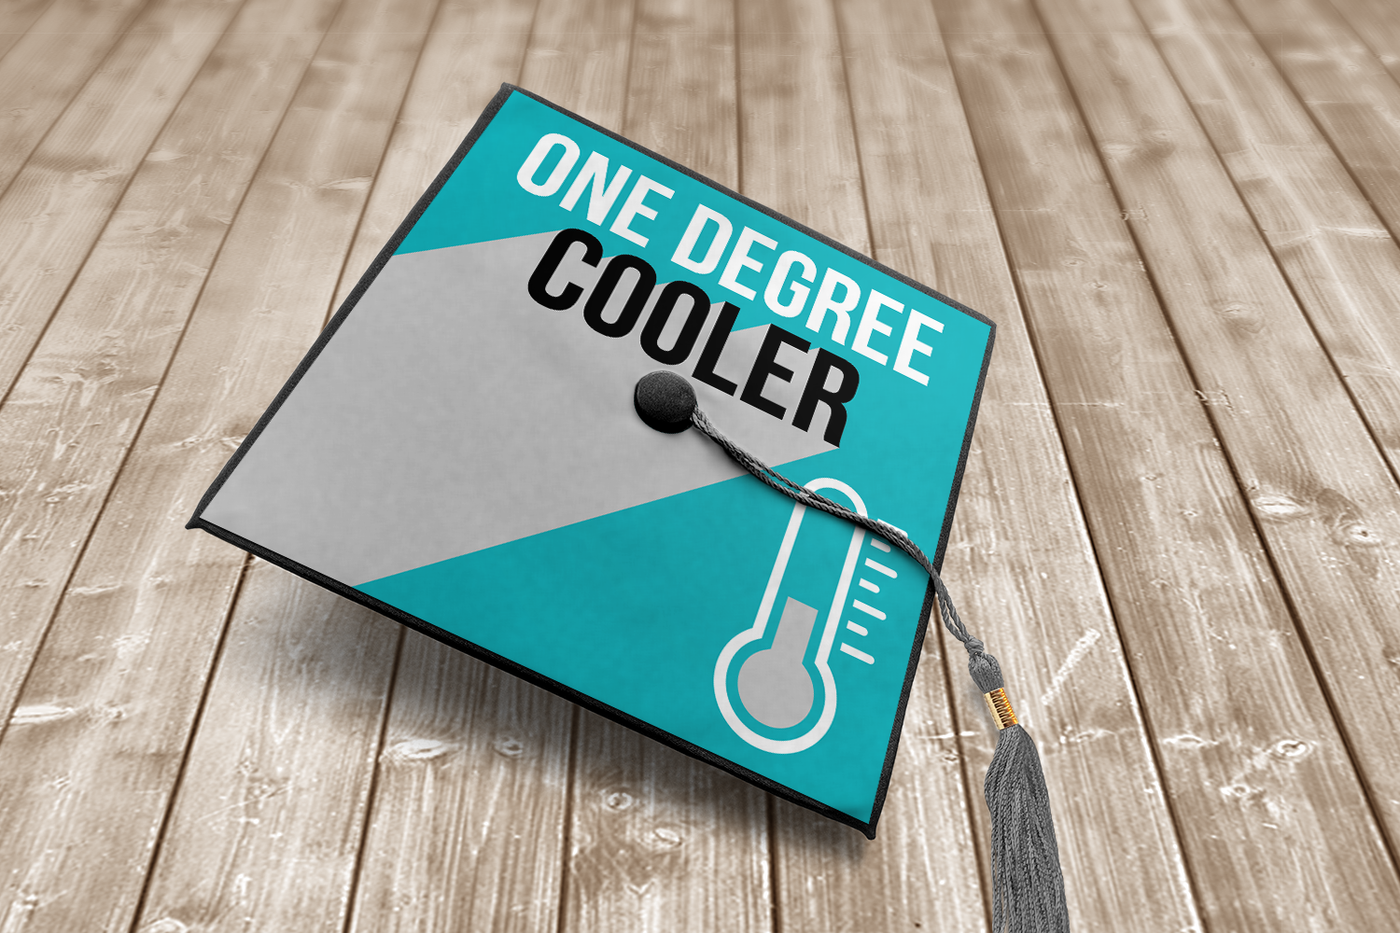 Graduation cap design that says "one degree cooler" with a thermometer.